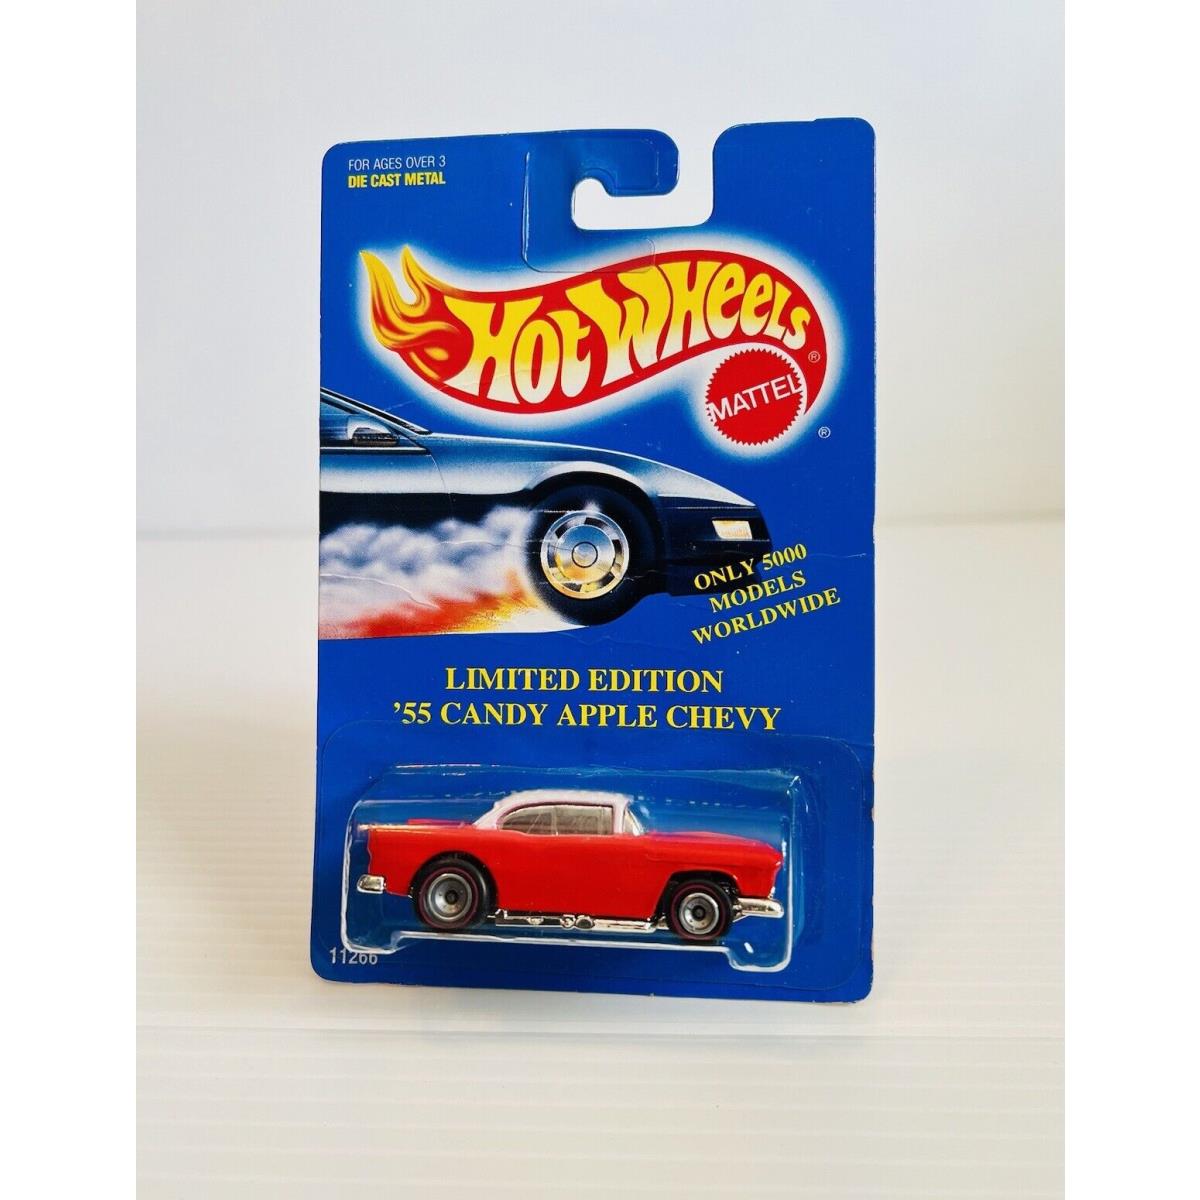 Hot Wheels Limited Edition `55 Candy Apple Chevy Only 5000 Models Worldwide